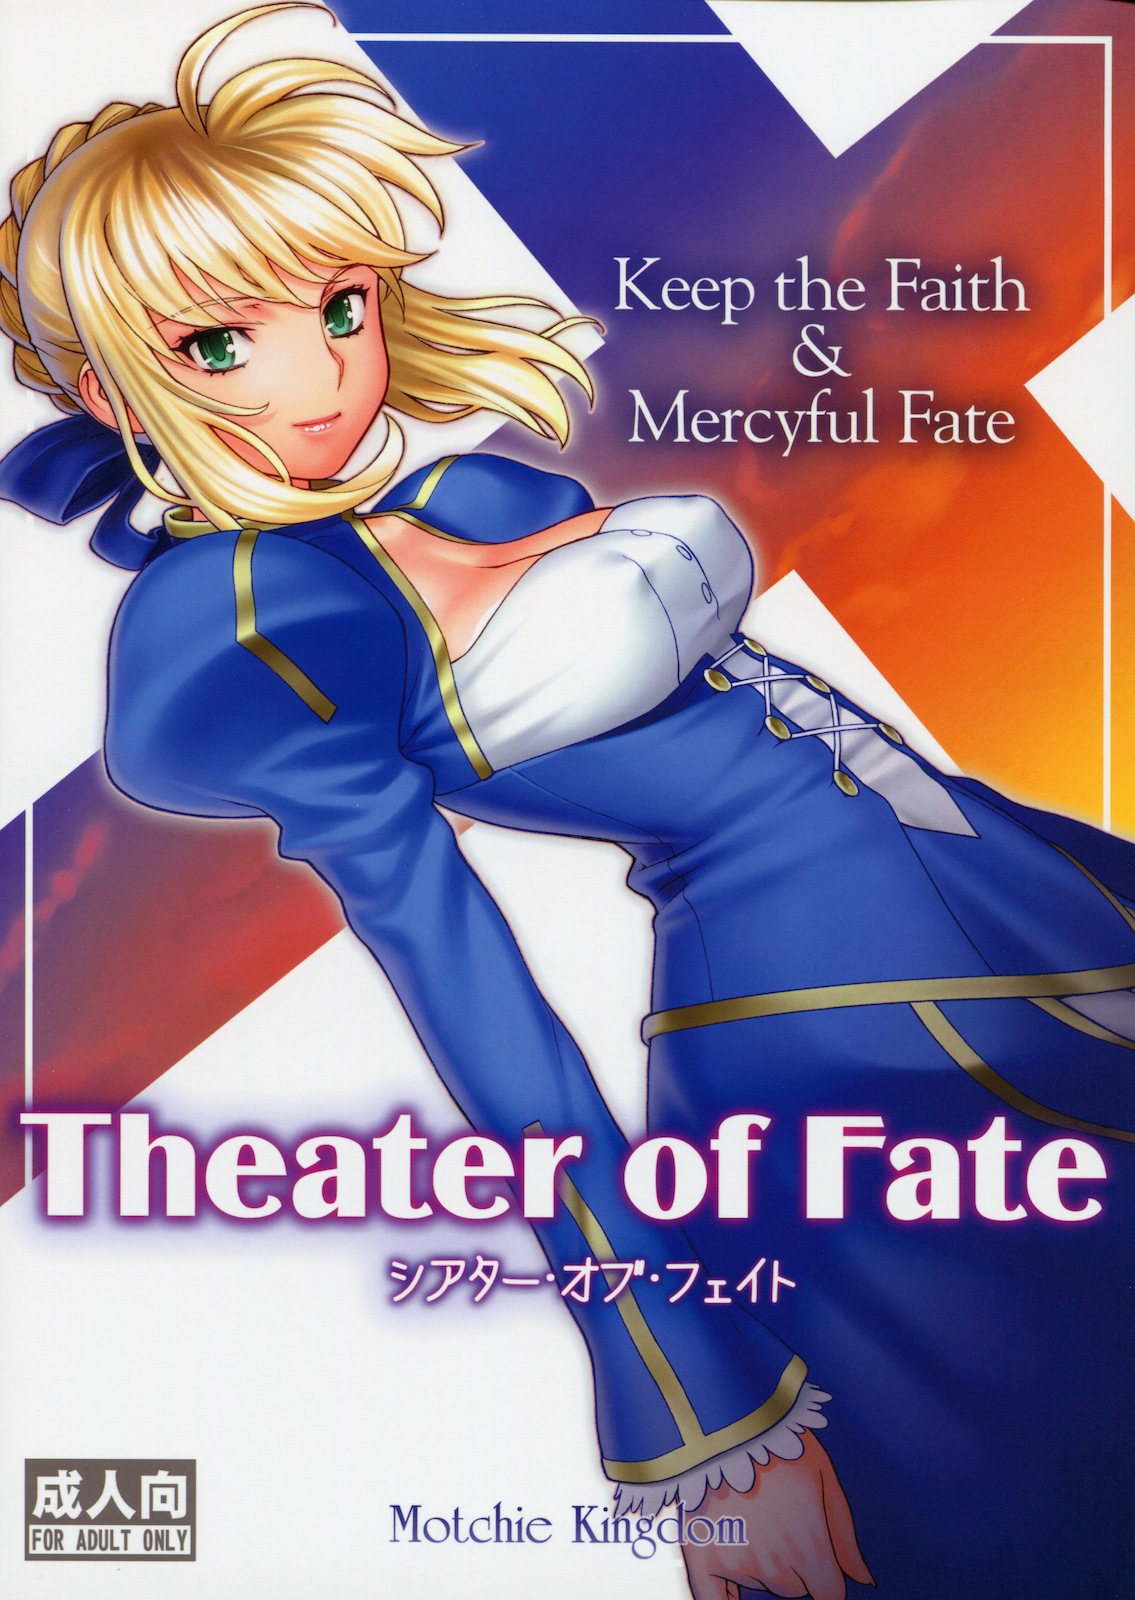 Motchie Kingdom Motchie Theater of Fate Fate stay night English Various 853272 0001